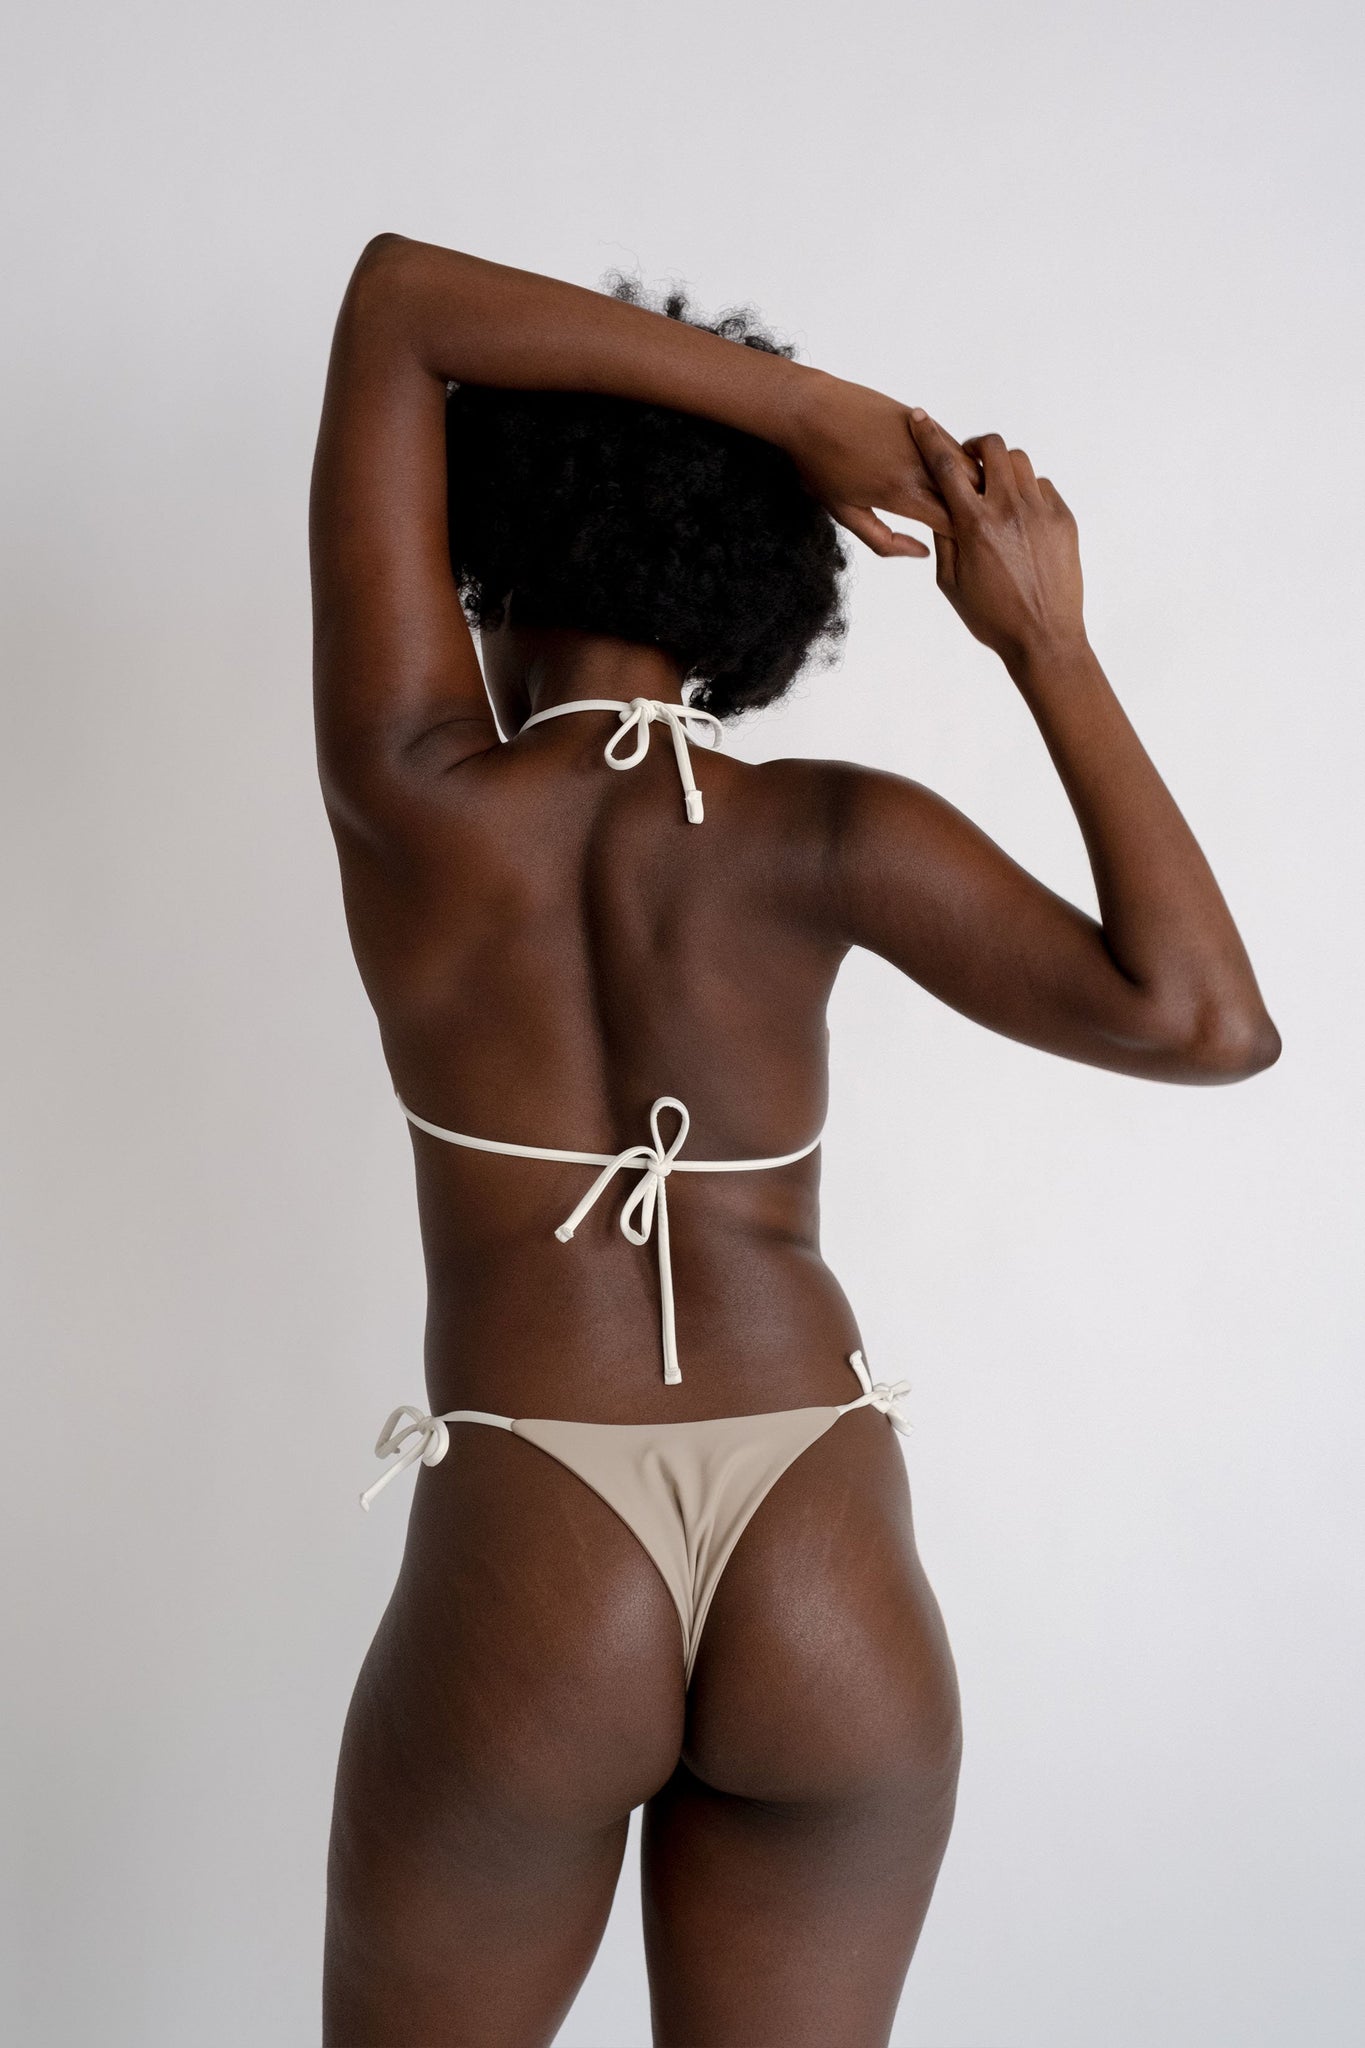 The back of a woman standing with her arms above her wearing nude triangle bikini bottoms with adjustable white strings and a matching nude triangle bikini top with white adjustable strings.